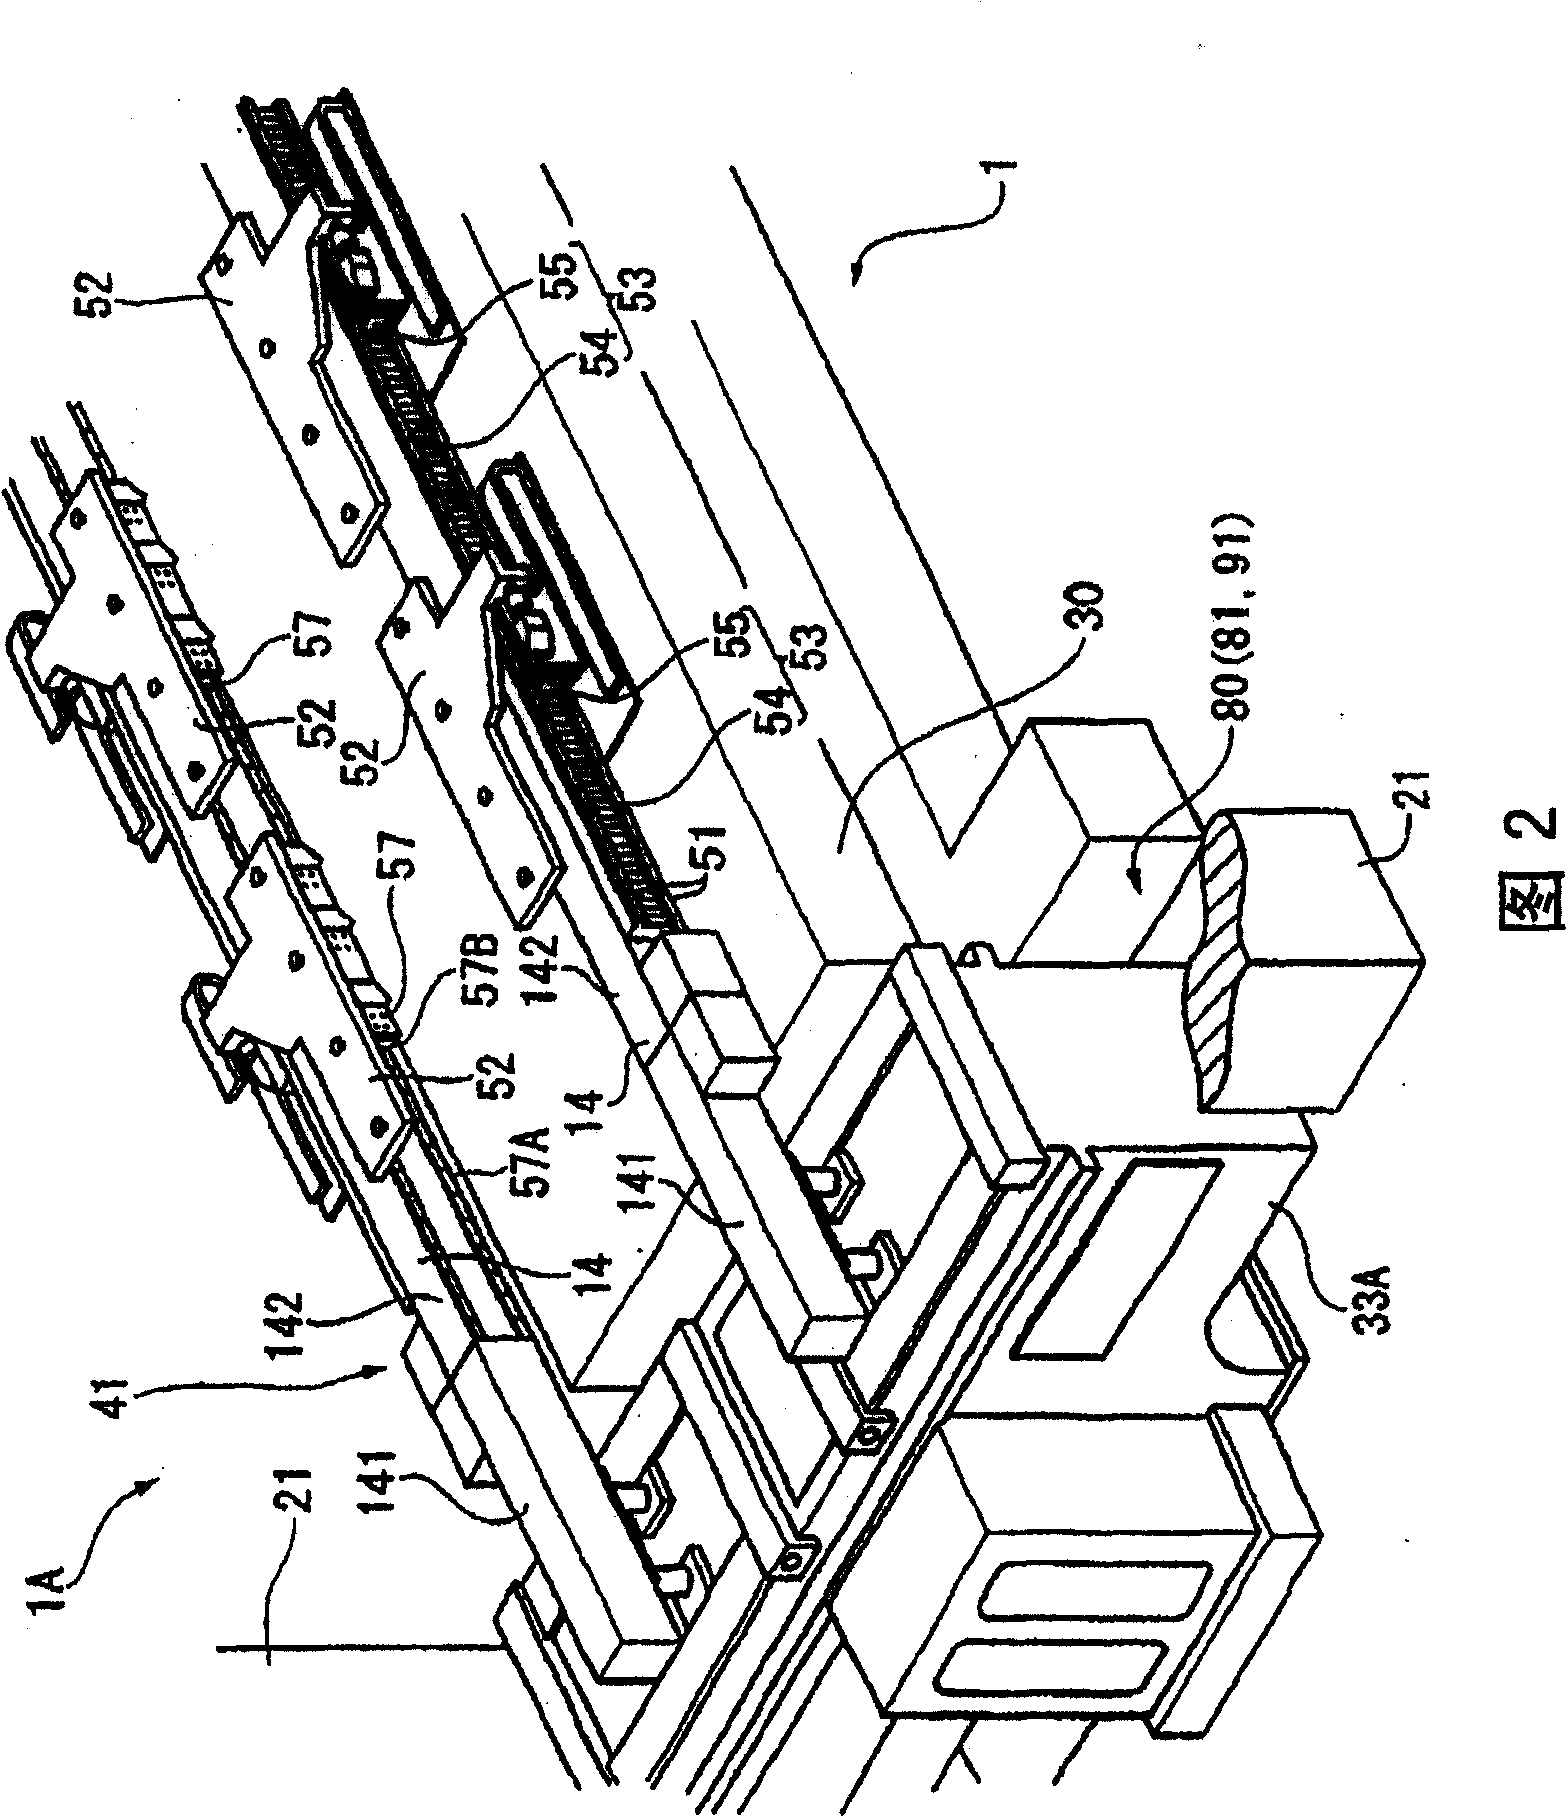 Work carrying device of pressing machine